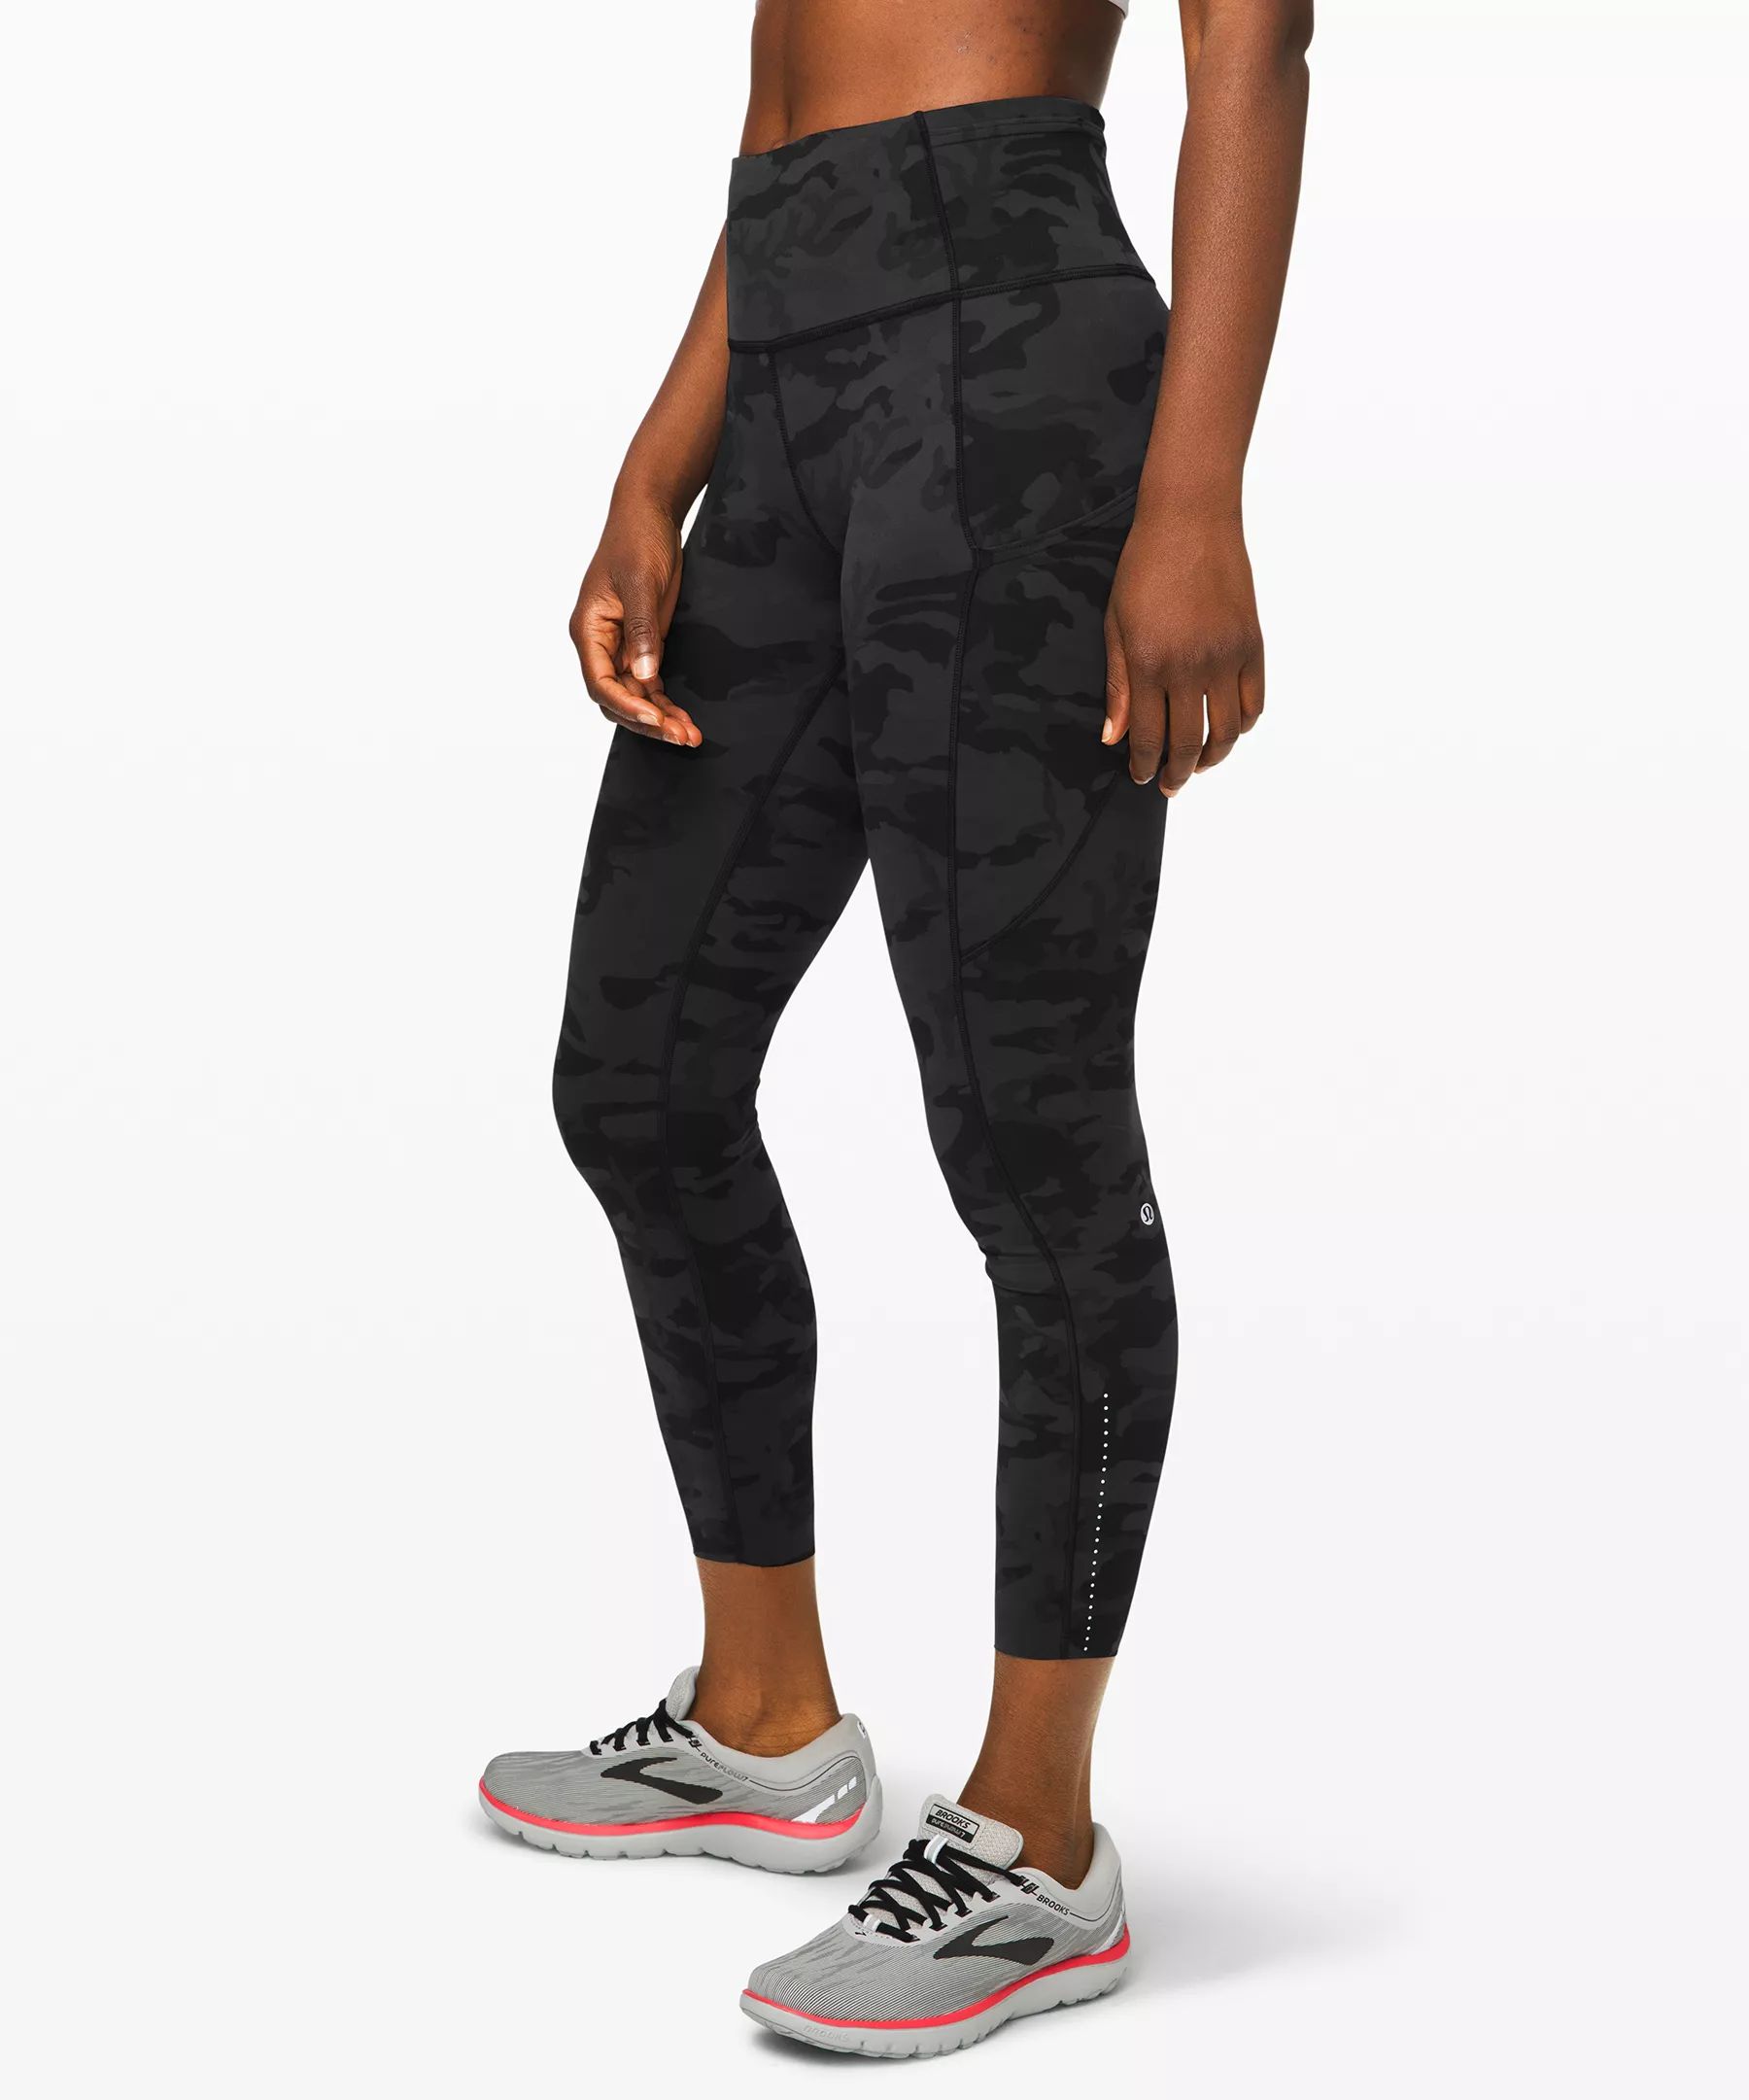 Fast and Free Tight 25" Reflective Nulux | Lululemon (US)